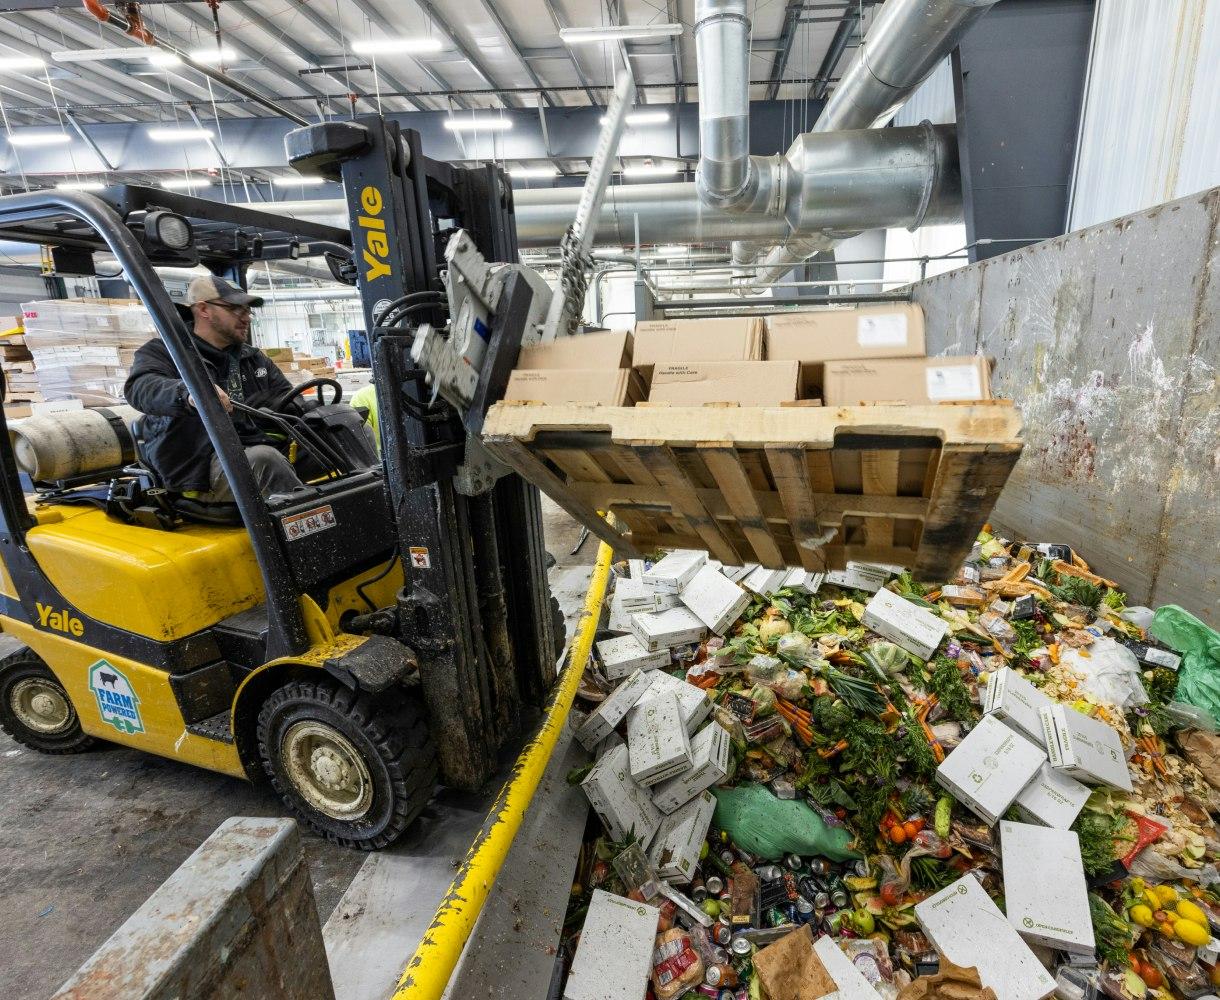 Depackaging waste at a organic waste recycling facility, preparing the food waste for farm powered anaerobic digestion